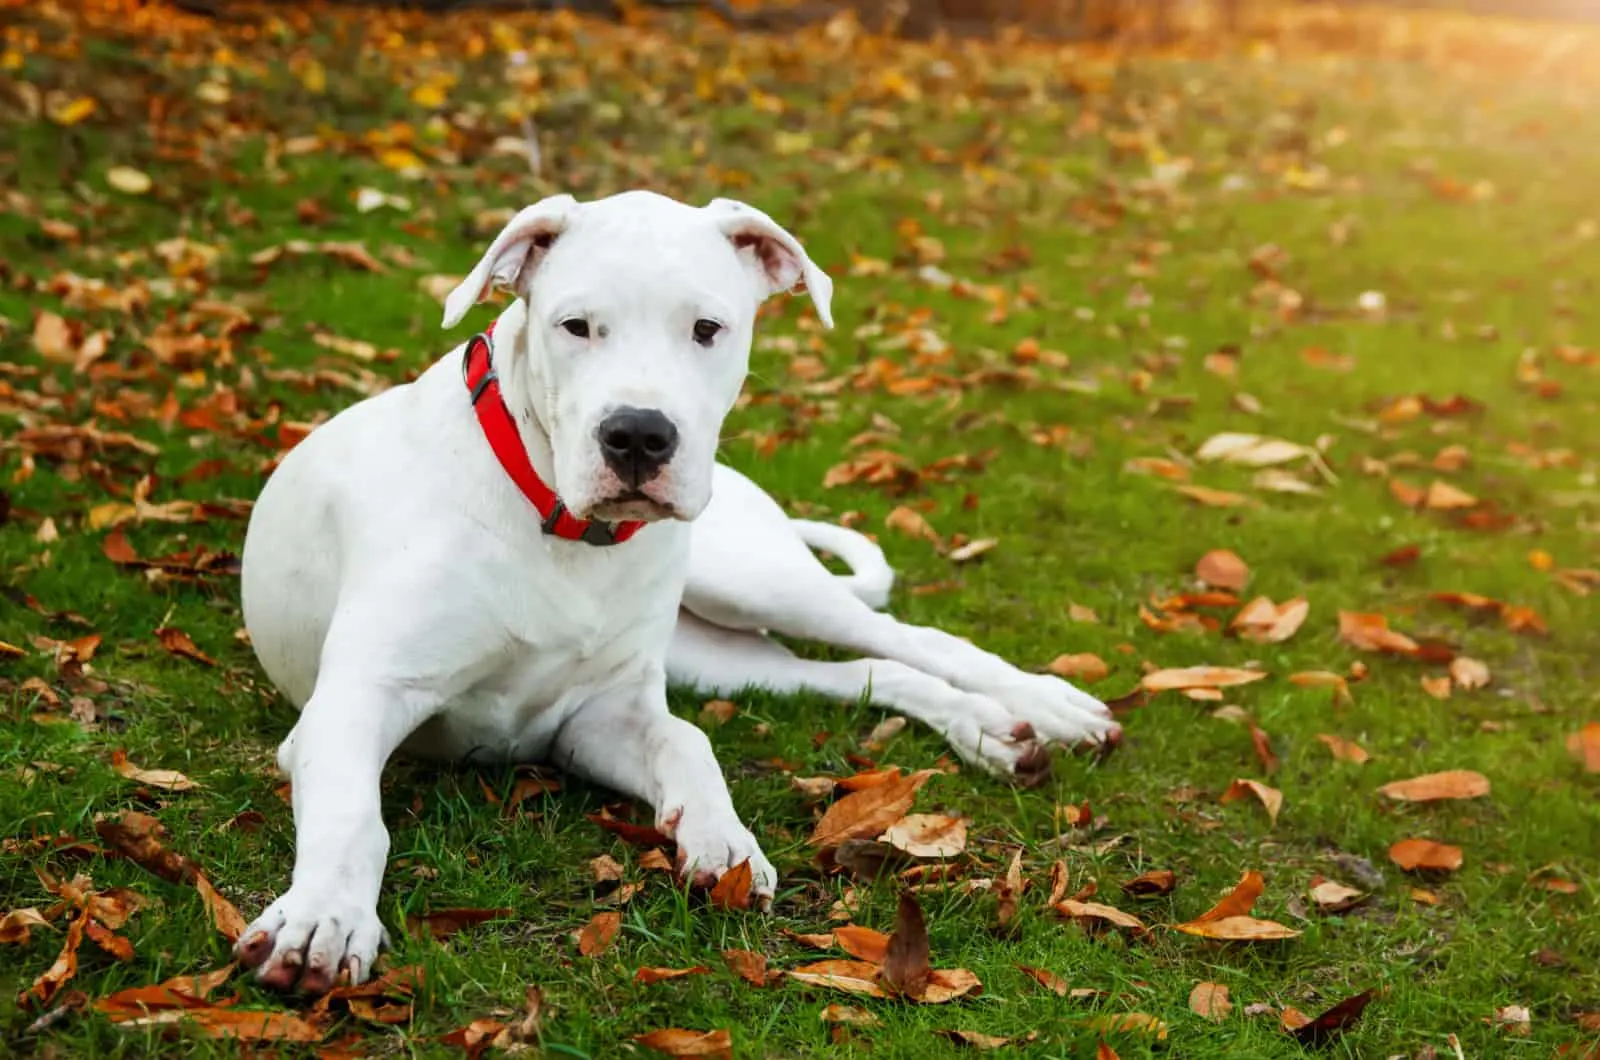 dogo argentino wearing a red collar